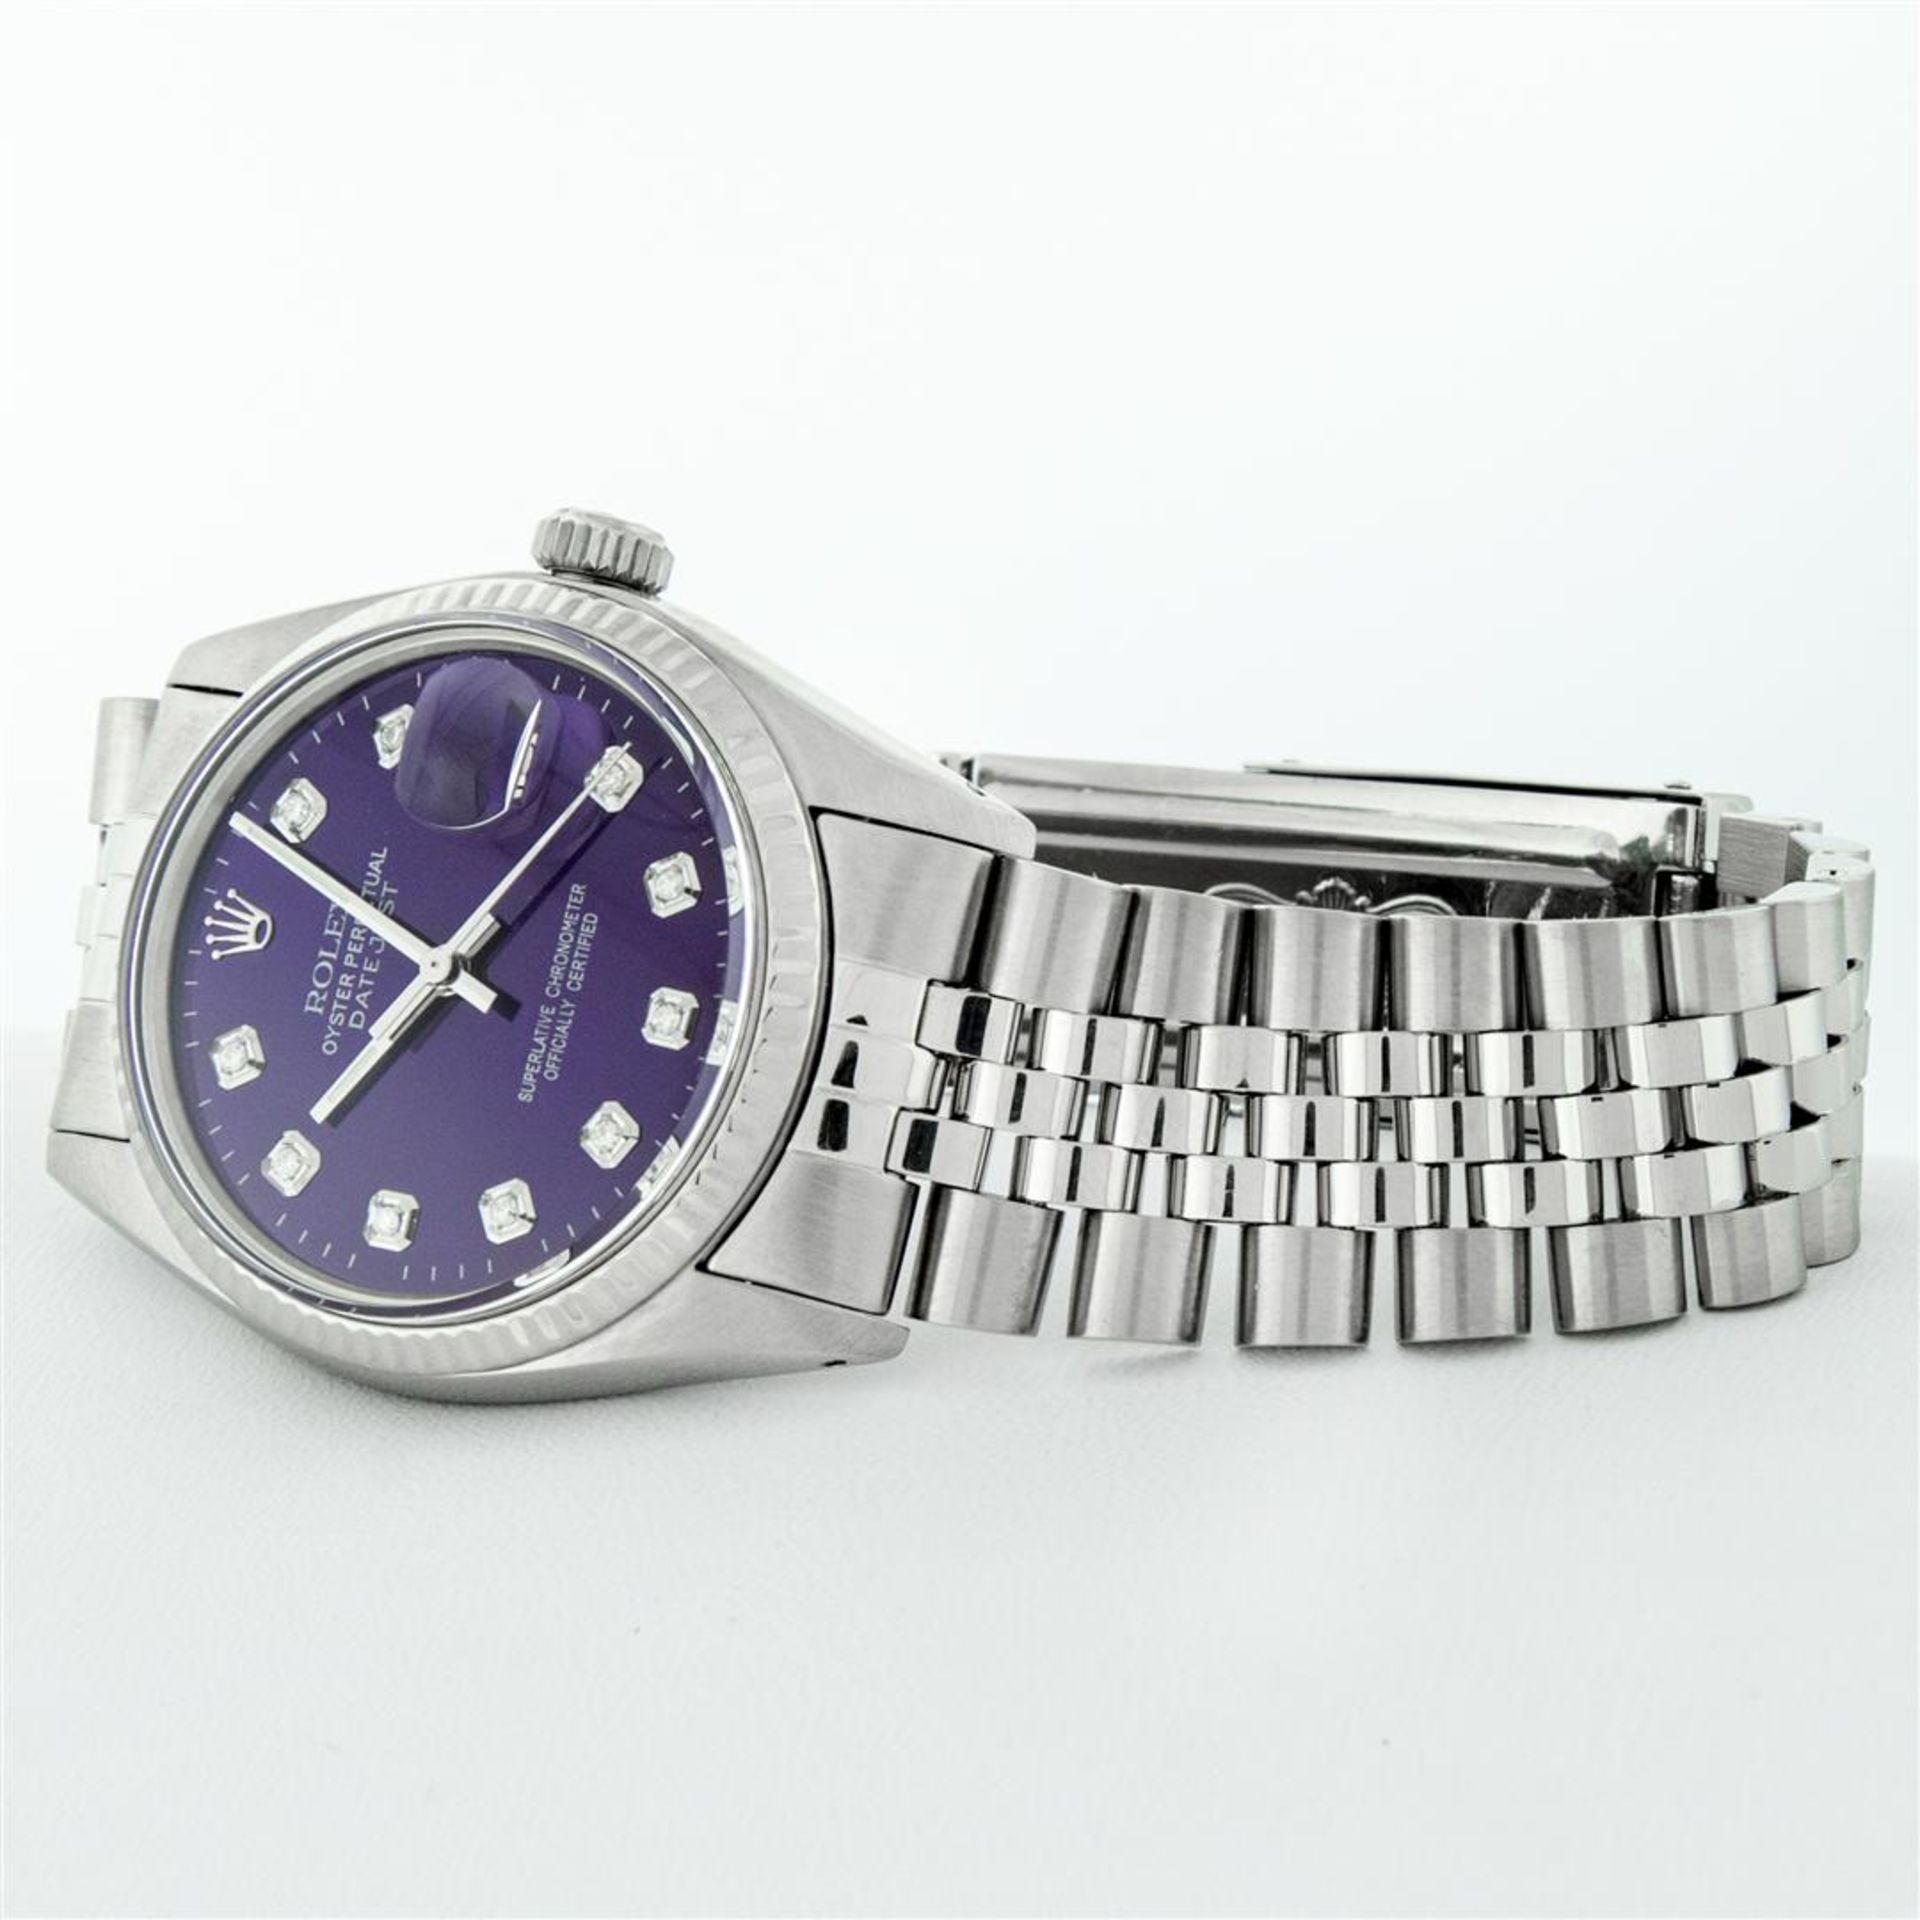 Rolex Mens Stainless Steel Purple Diamond 36MM Datejust Oyster Perpetual Wristwa - Image 5 of 9